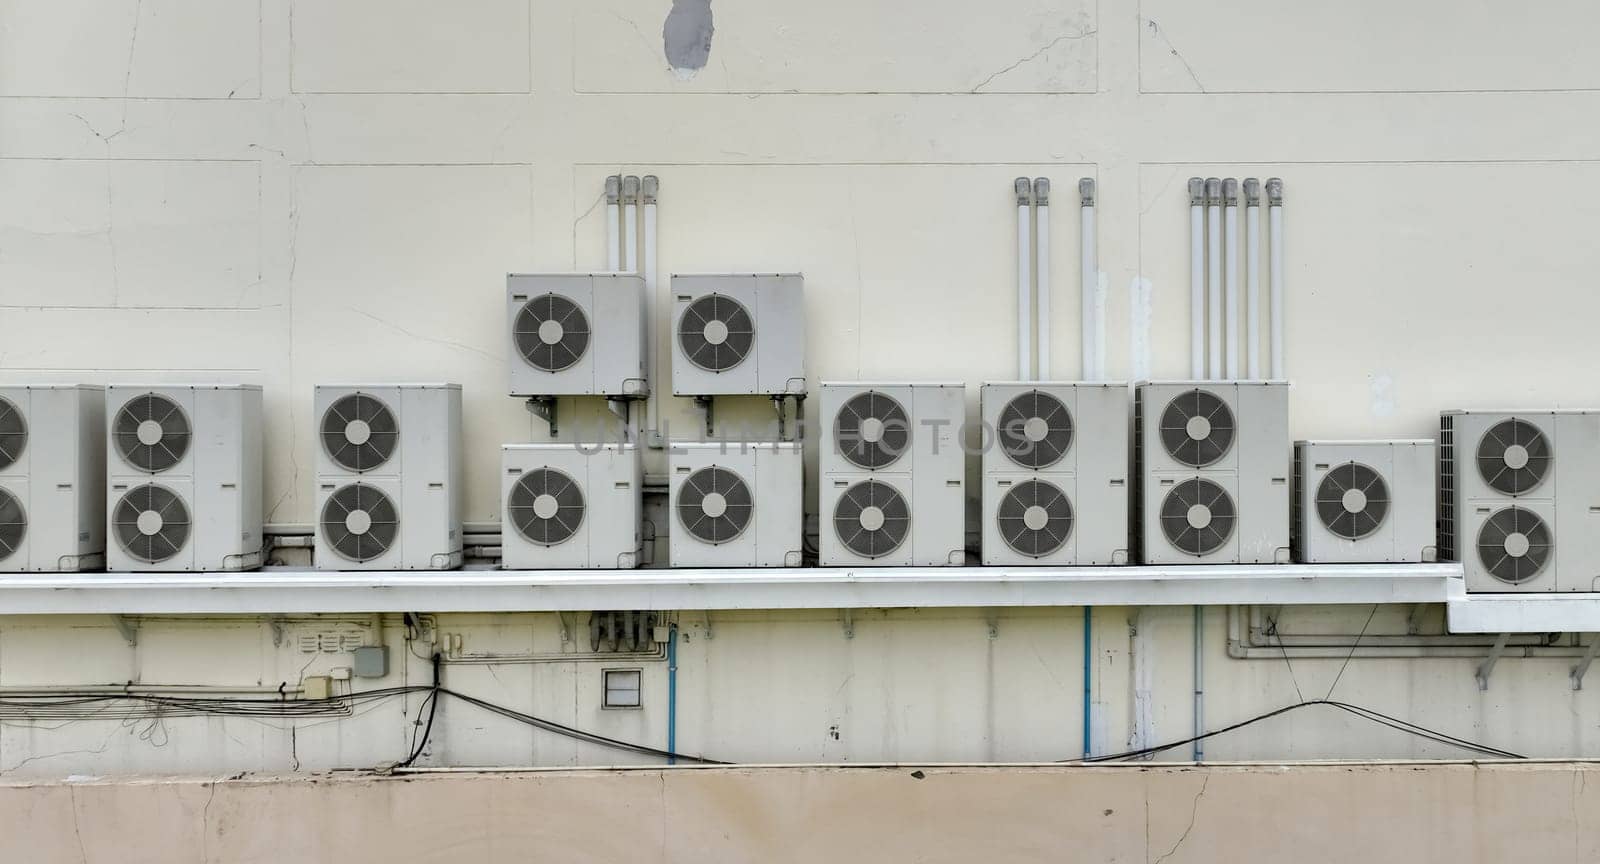 Many condensing units of air conditioners are installed on concrete building wall. Air conditioner maintenance and repair service at home or office. AC maintenance. Air compressor outside building.